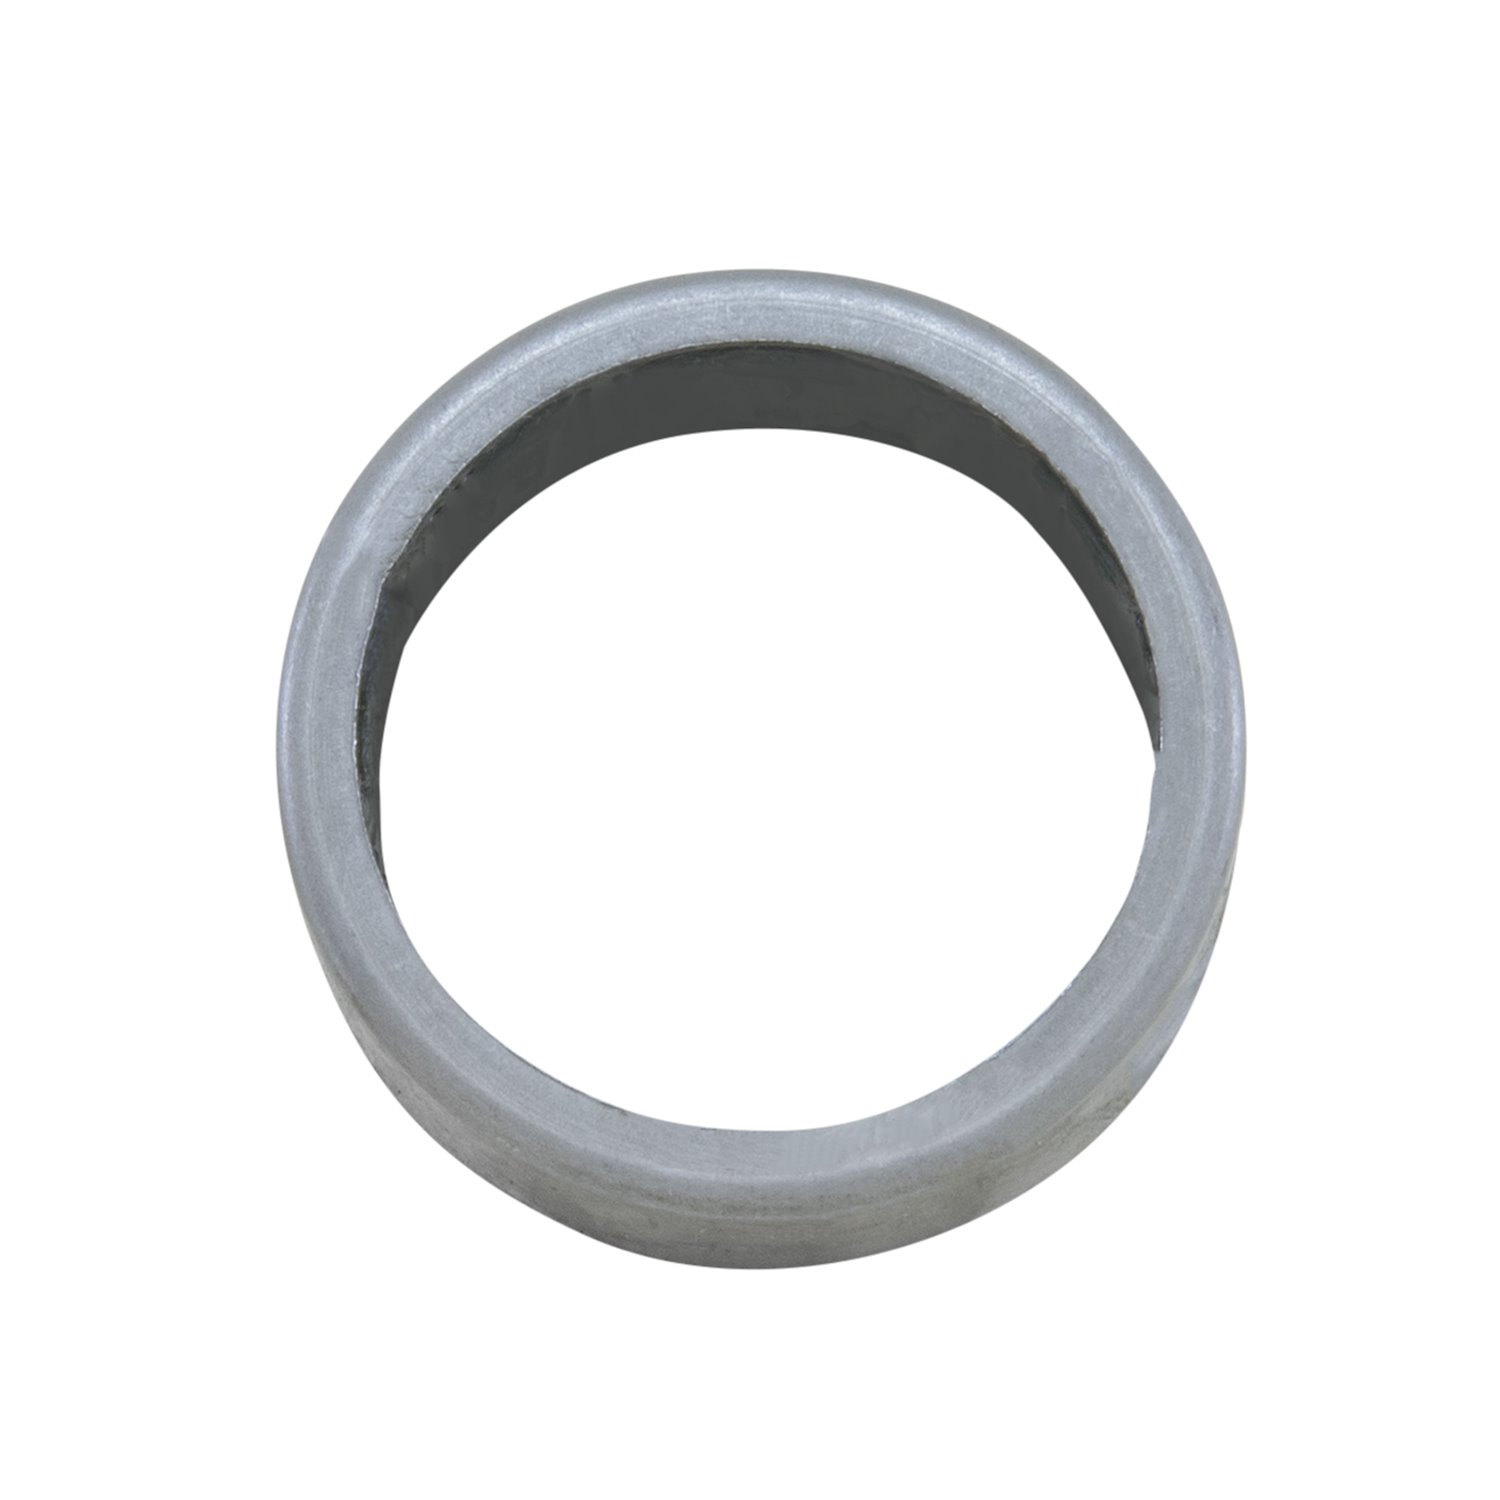 Spindle Nut Washer For Dana 50 & 60, 2 in. I.D.